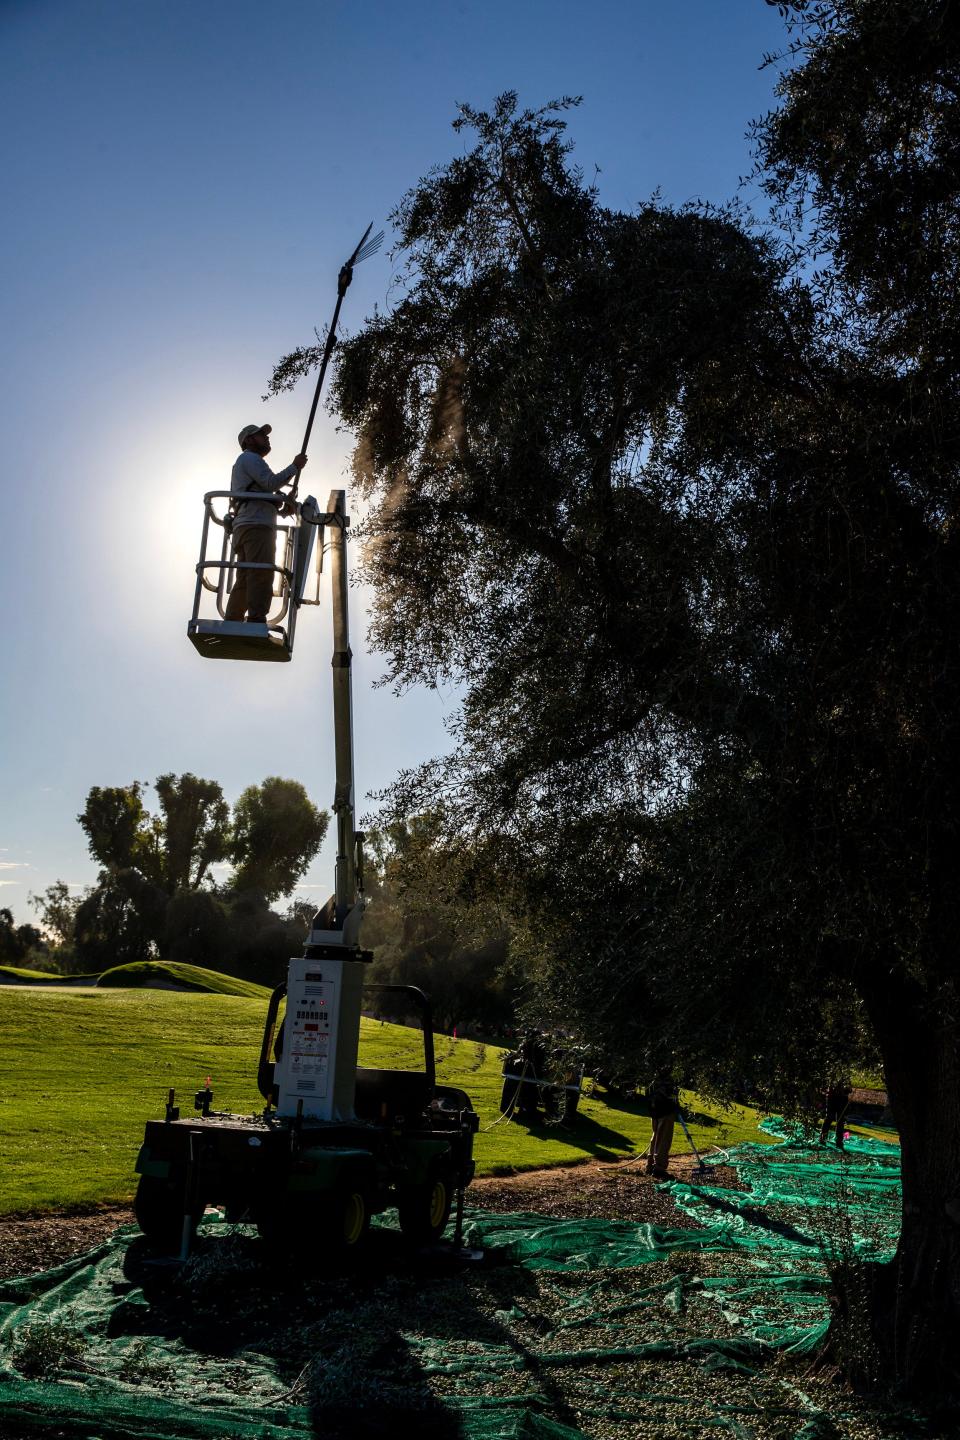 Workers shake olives from the trees during the one-day public olive harvest at the Annenberg estate at the Sunnylands Center and Gardens in Rancho Mirage, Calif., on Tuesday, Nov. 14, 2023.